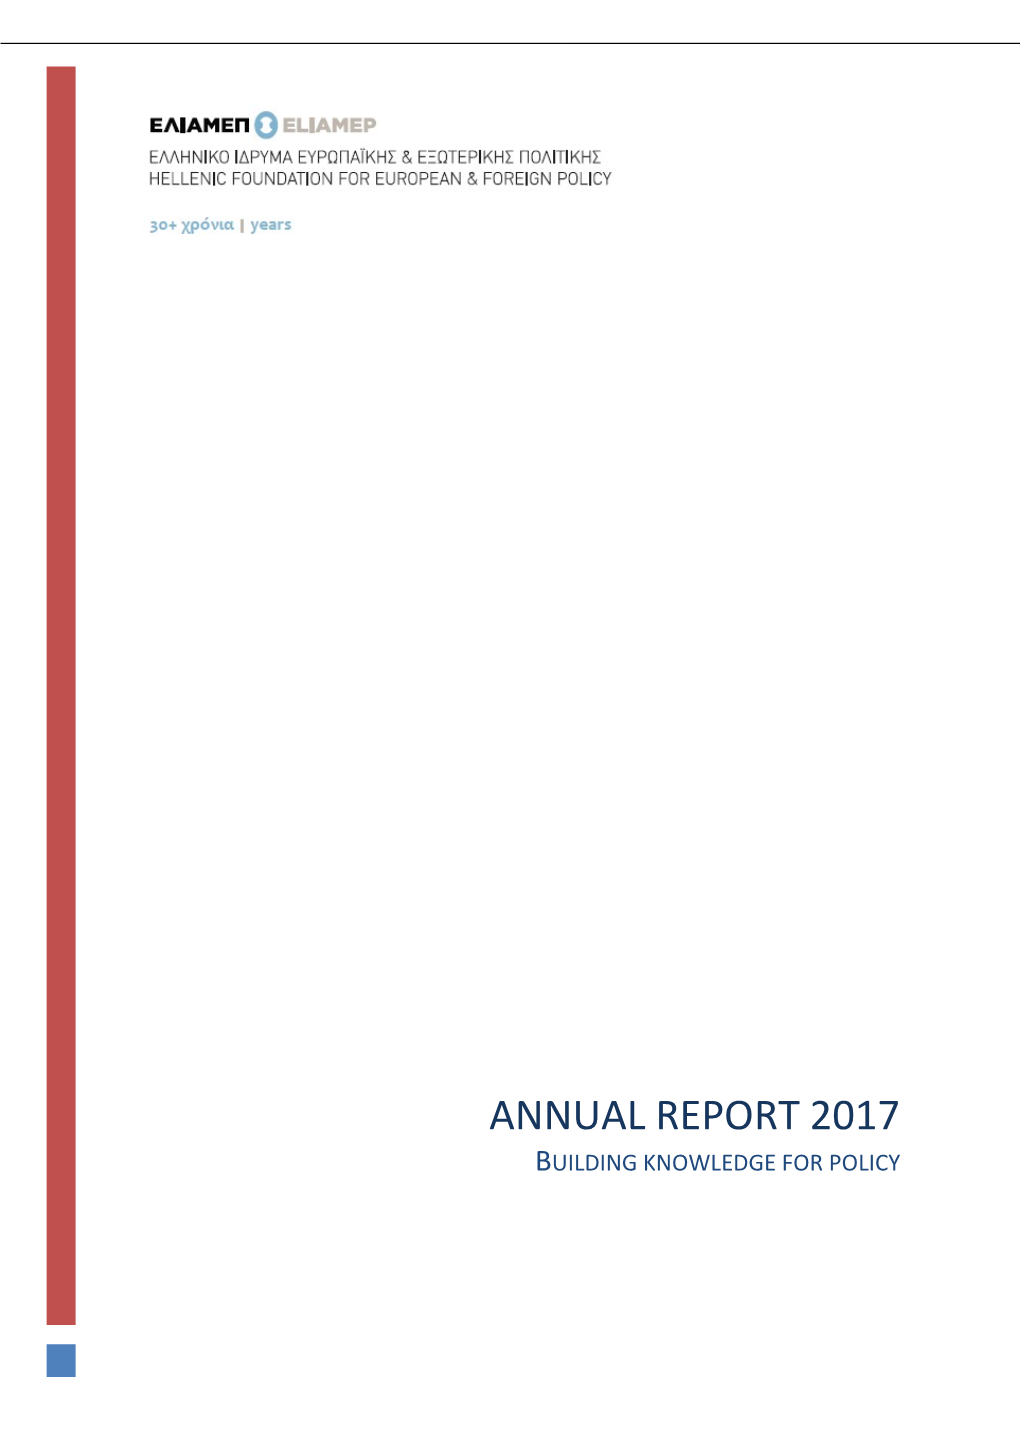 Annual Report 2017 Building Knowledge for Policy